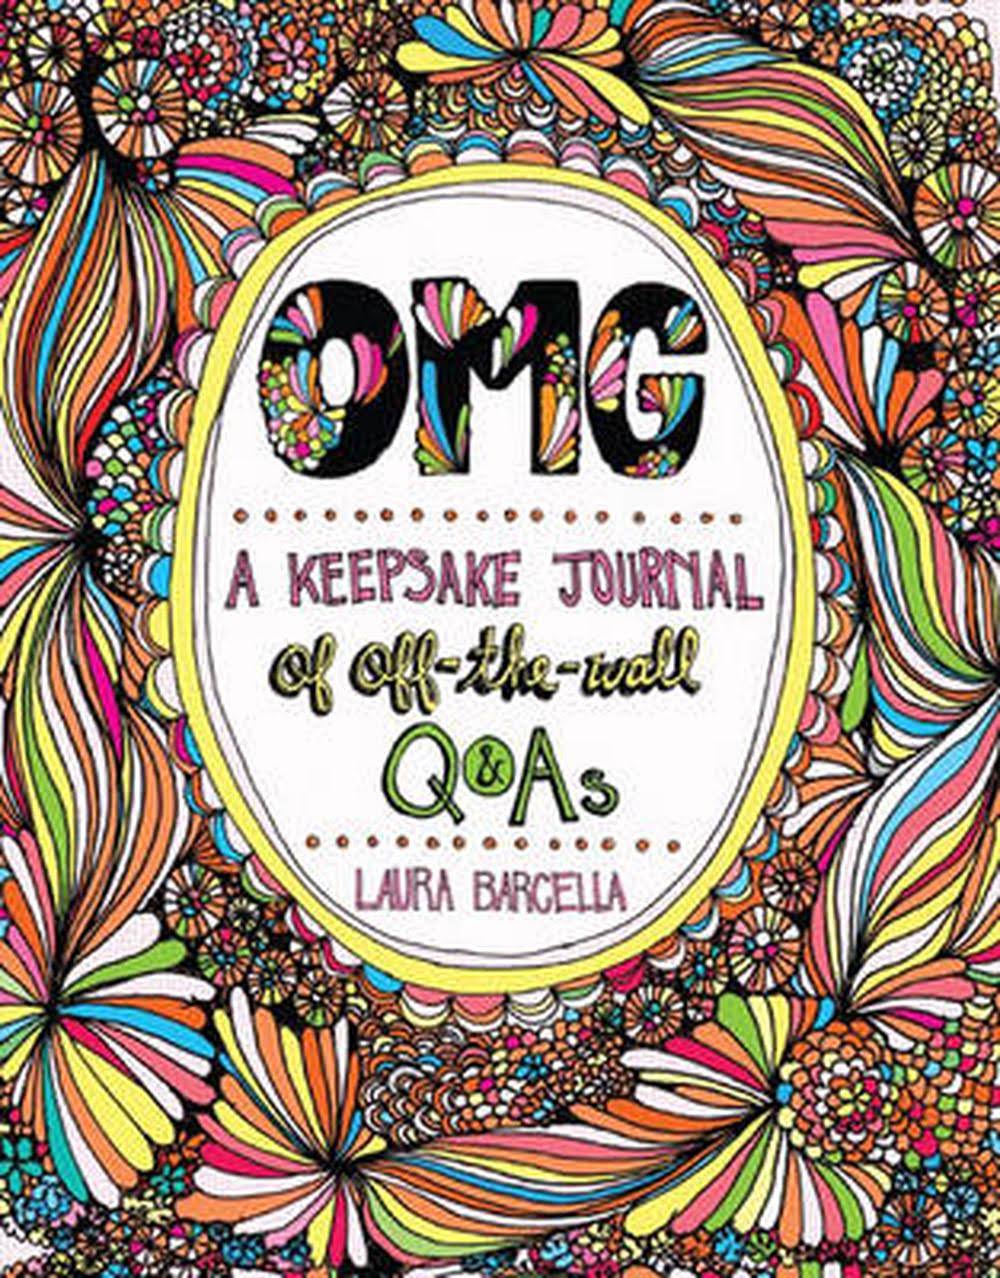 OMG: A Keepsake Journal of Off-the-Wall Q&As [Book]